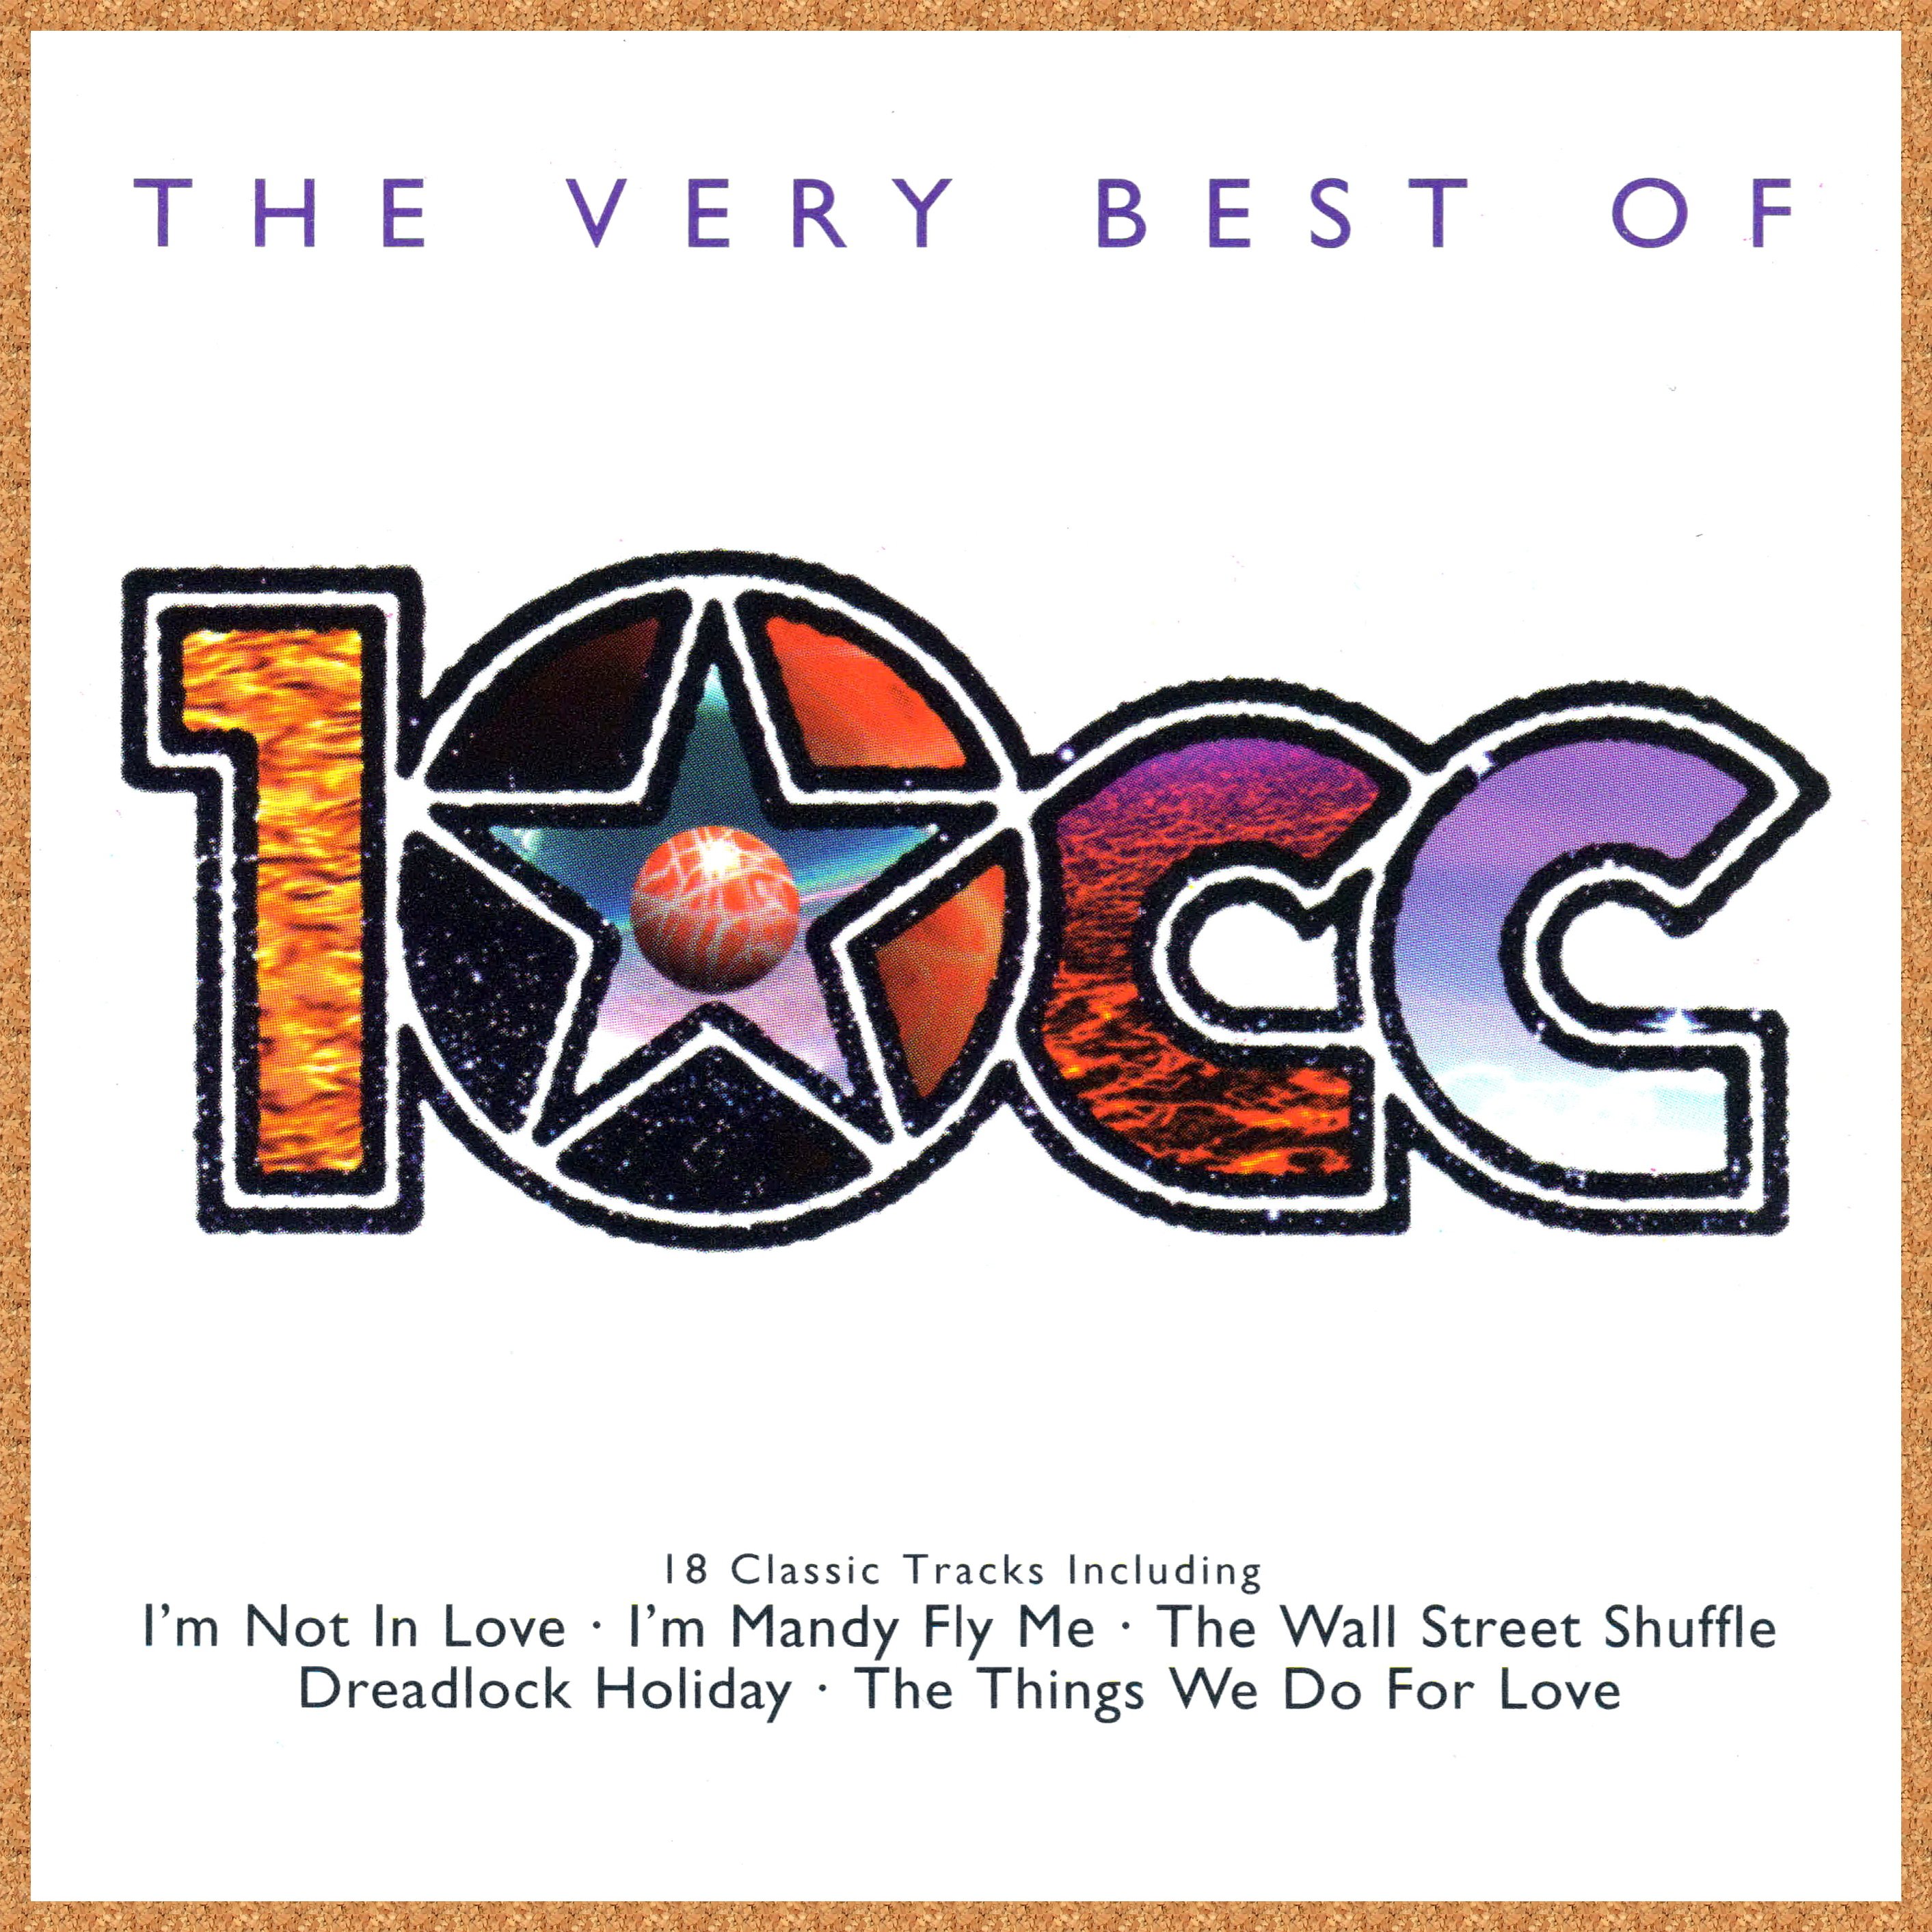 10cc-The Very Best Of 10cc-CD-FLAC-1997-FRAY